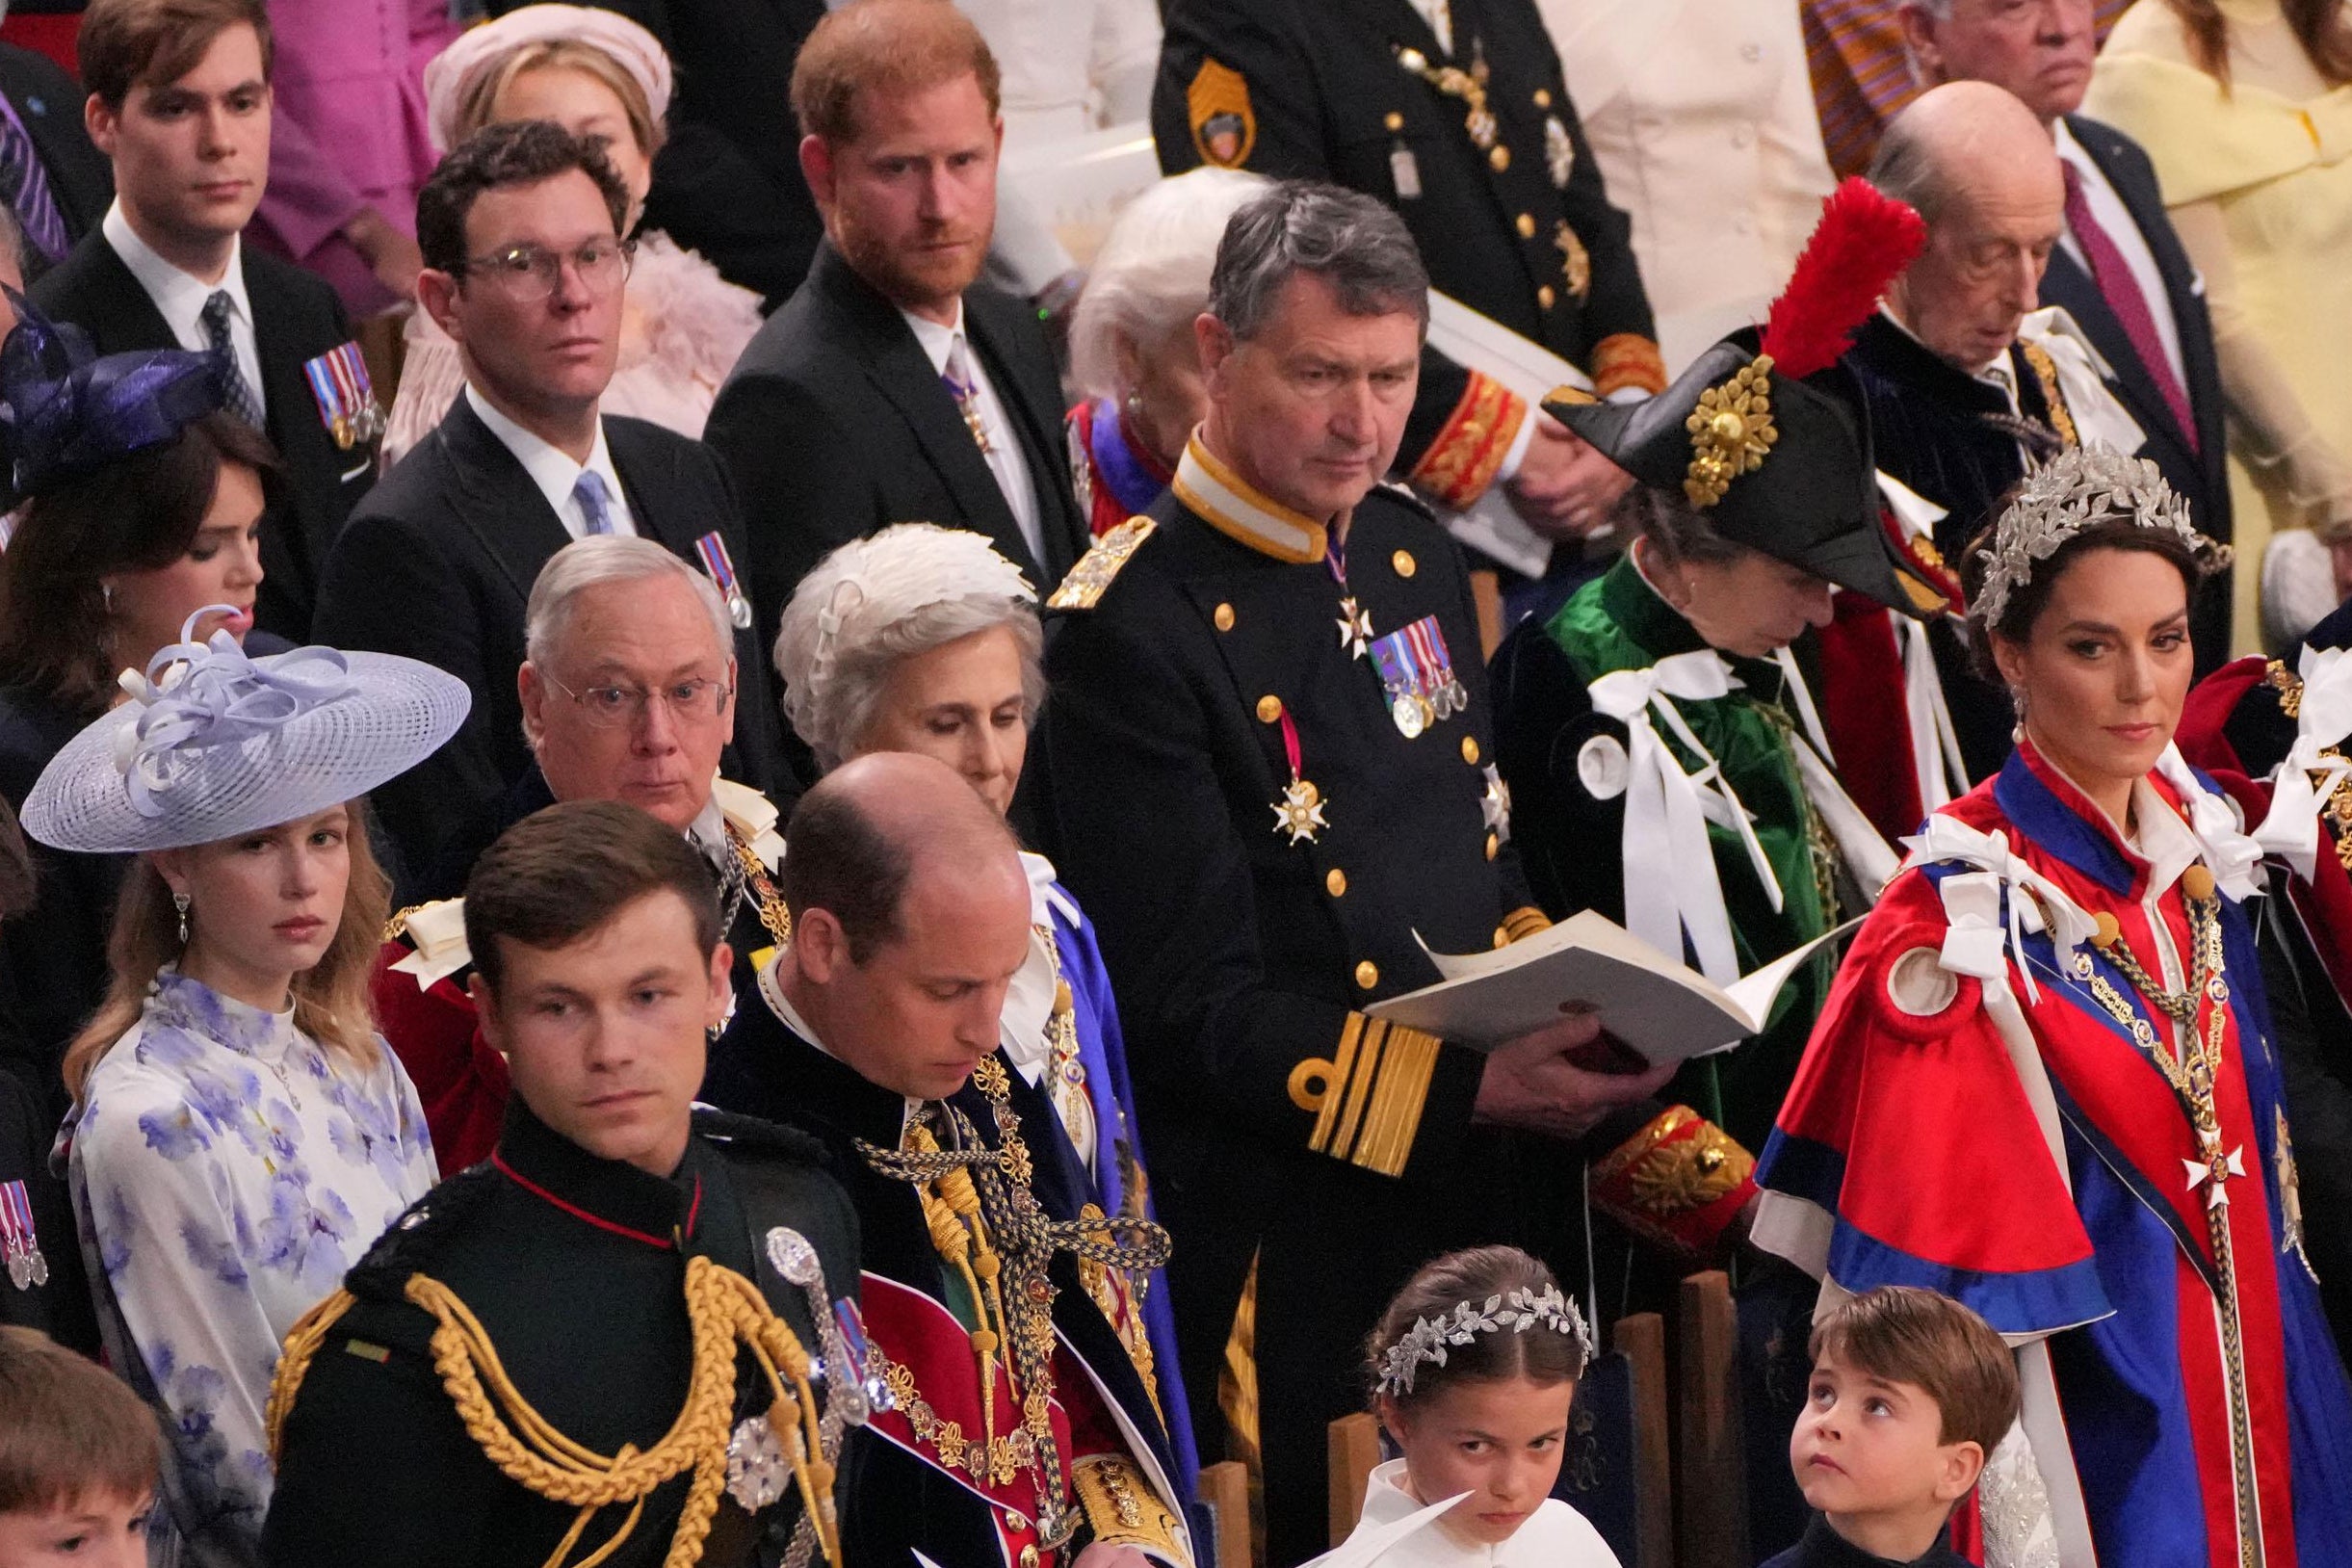 LONDON, ENGLAND - MAY 06: (Front row 3rd left to right) Prince William, Prince of Wales, Princess Charlotte, Prince Louis, Catherine, Princess of Wales, Prince Edward, the Duke of Edinburgh and Sophie, the Duchess of Edinburgh with Prince Harry, Duke of Sussex (3rd row 4th right) at the coronation ceremony of King Charles III and Queen Camilla in Westminster Abbey on May 6, 2023 in London, England. The Coronation of Charles III and his wife, Camilla, as King and Queen of the United Kingdom of Great Britain and Northern Ireland, and the other Commonwealth realms takes place at Westminster Abbey today. Charles acceded to the throne on 8 September 2022, upon the death of his mother, Elizabeth II. (Photo by Aaron Chown - WPA Pool/Getty Images)